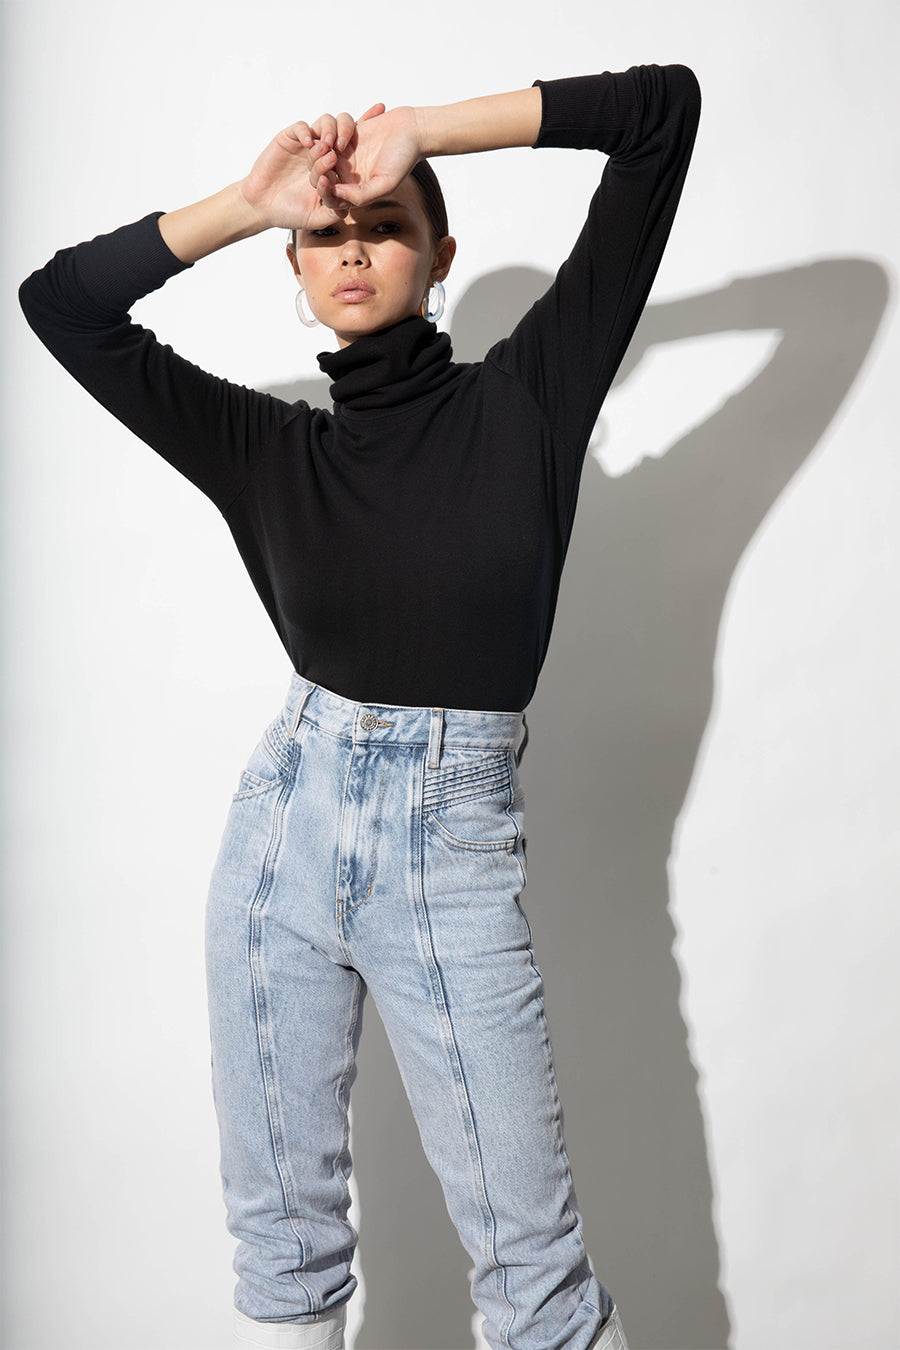 A model with her arms up and hands resting on her forehead is wearing a black turtleneck and blue acid-wash jeans.